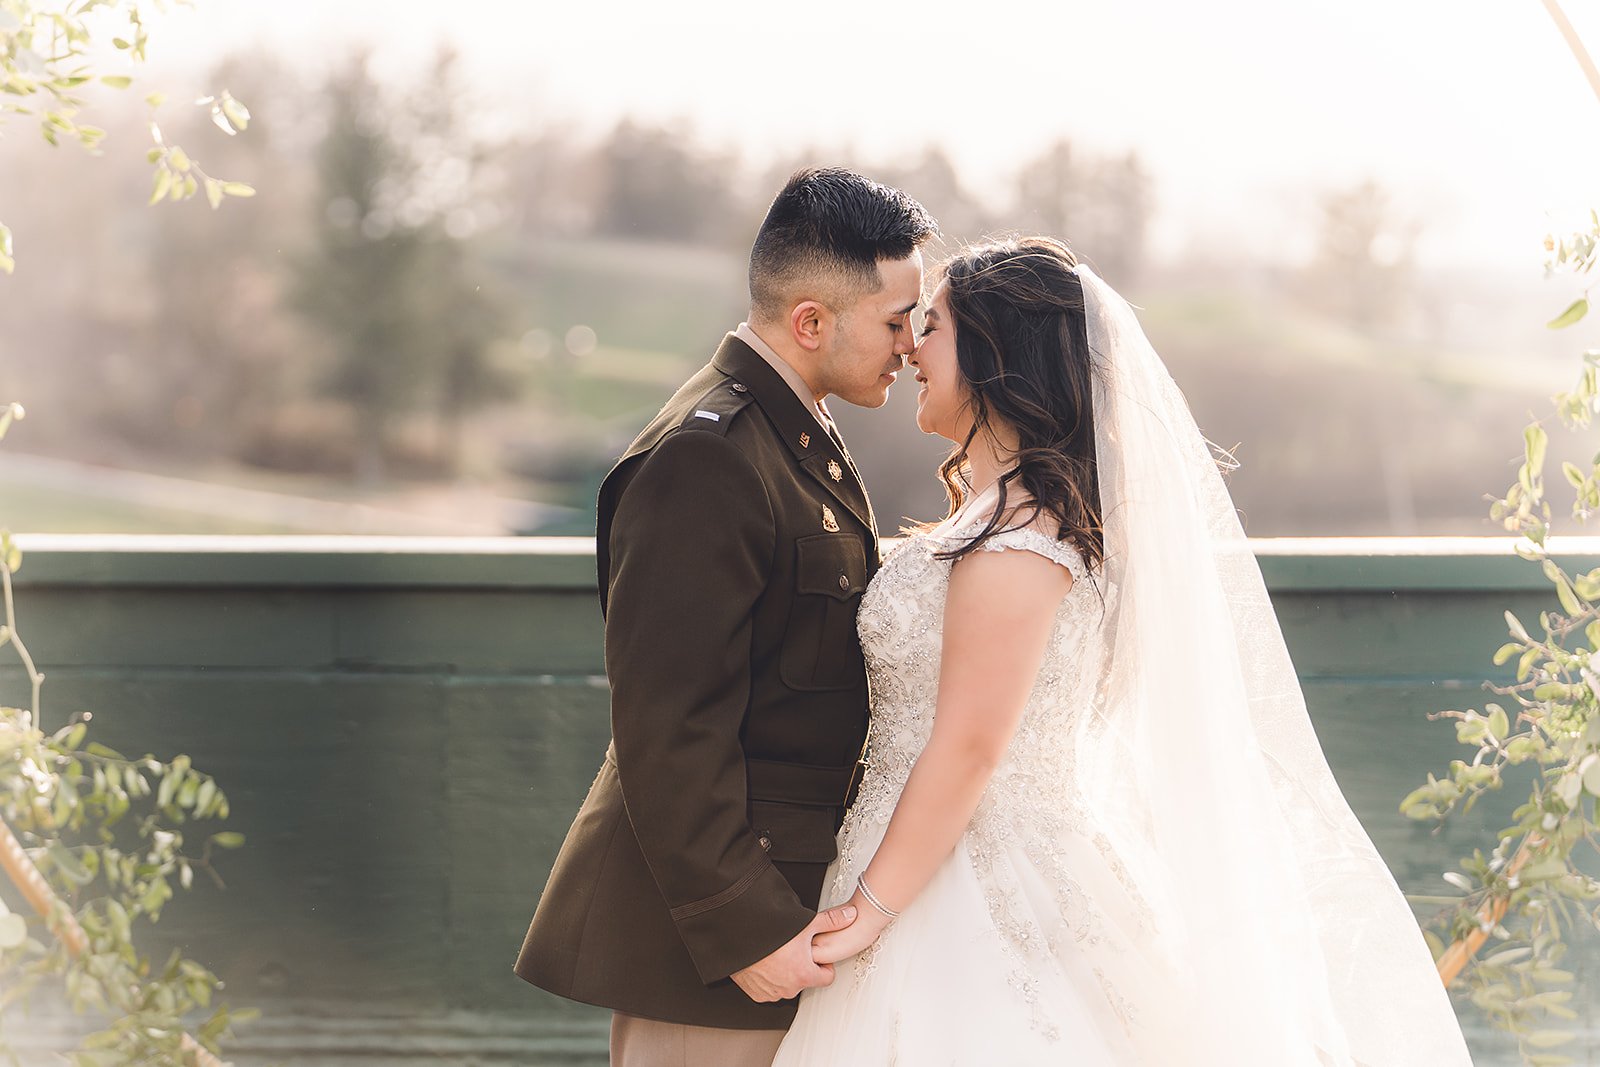  An Asian Bride and Groom share a sweet moment in the sunlight on their wedding day 